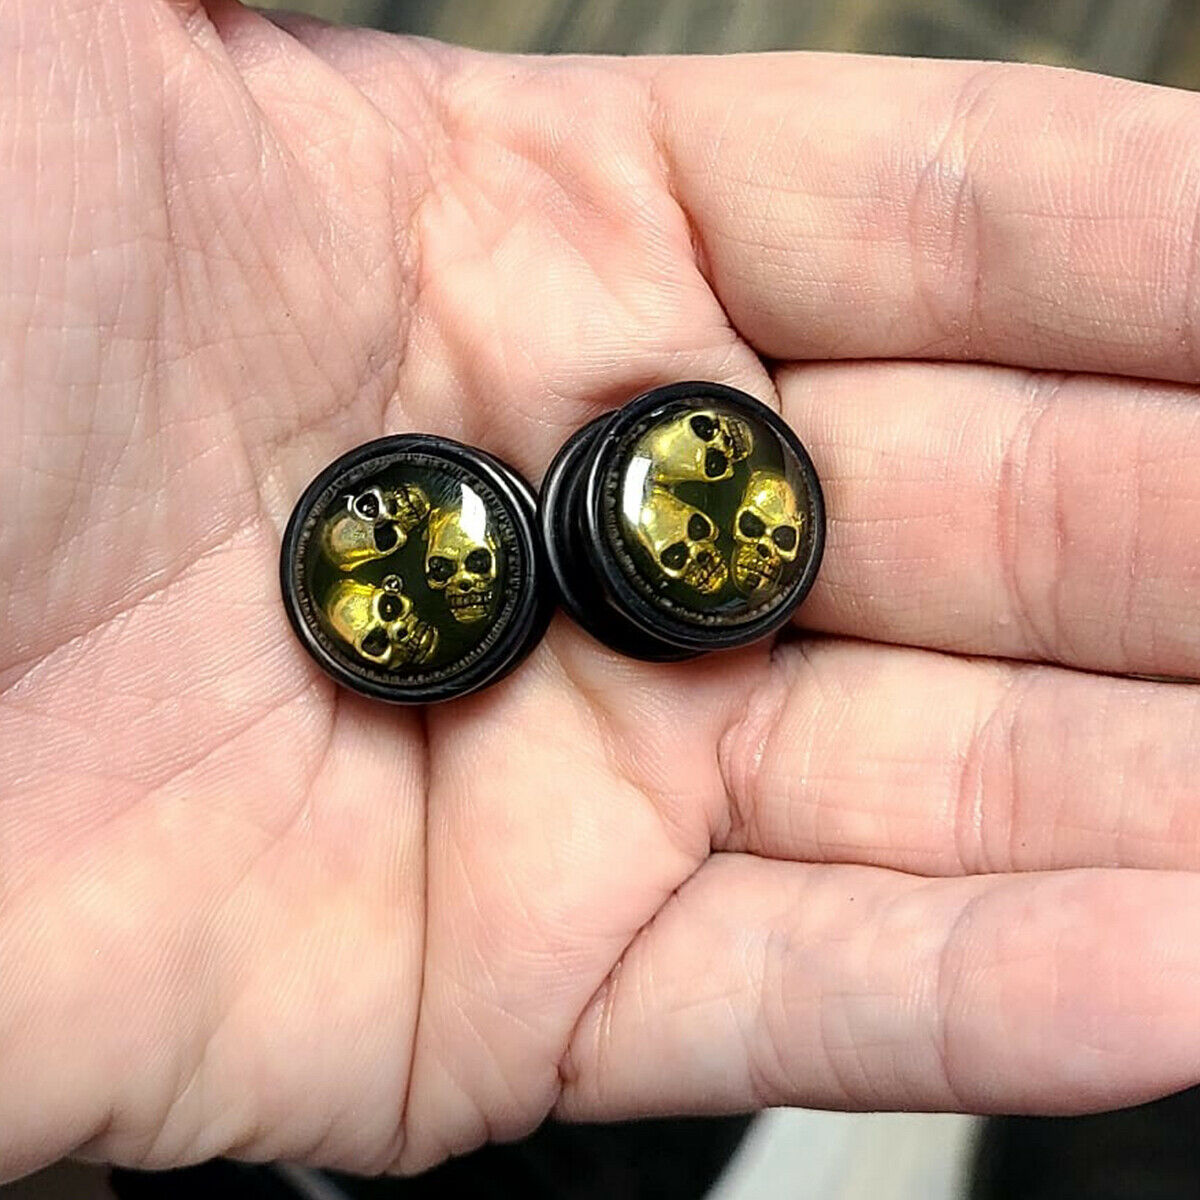 Pair of Acrylic Ear Plugs O-ring Triple Antique Gold Skull Design 16mm 5/8"